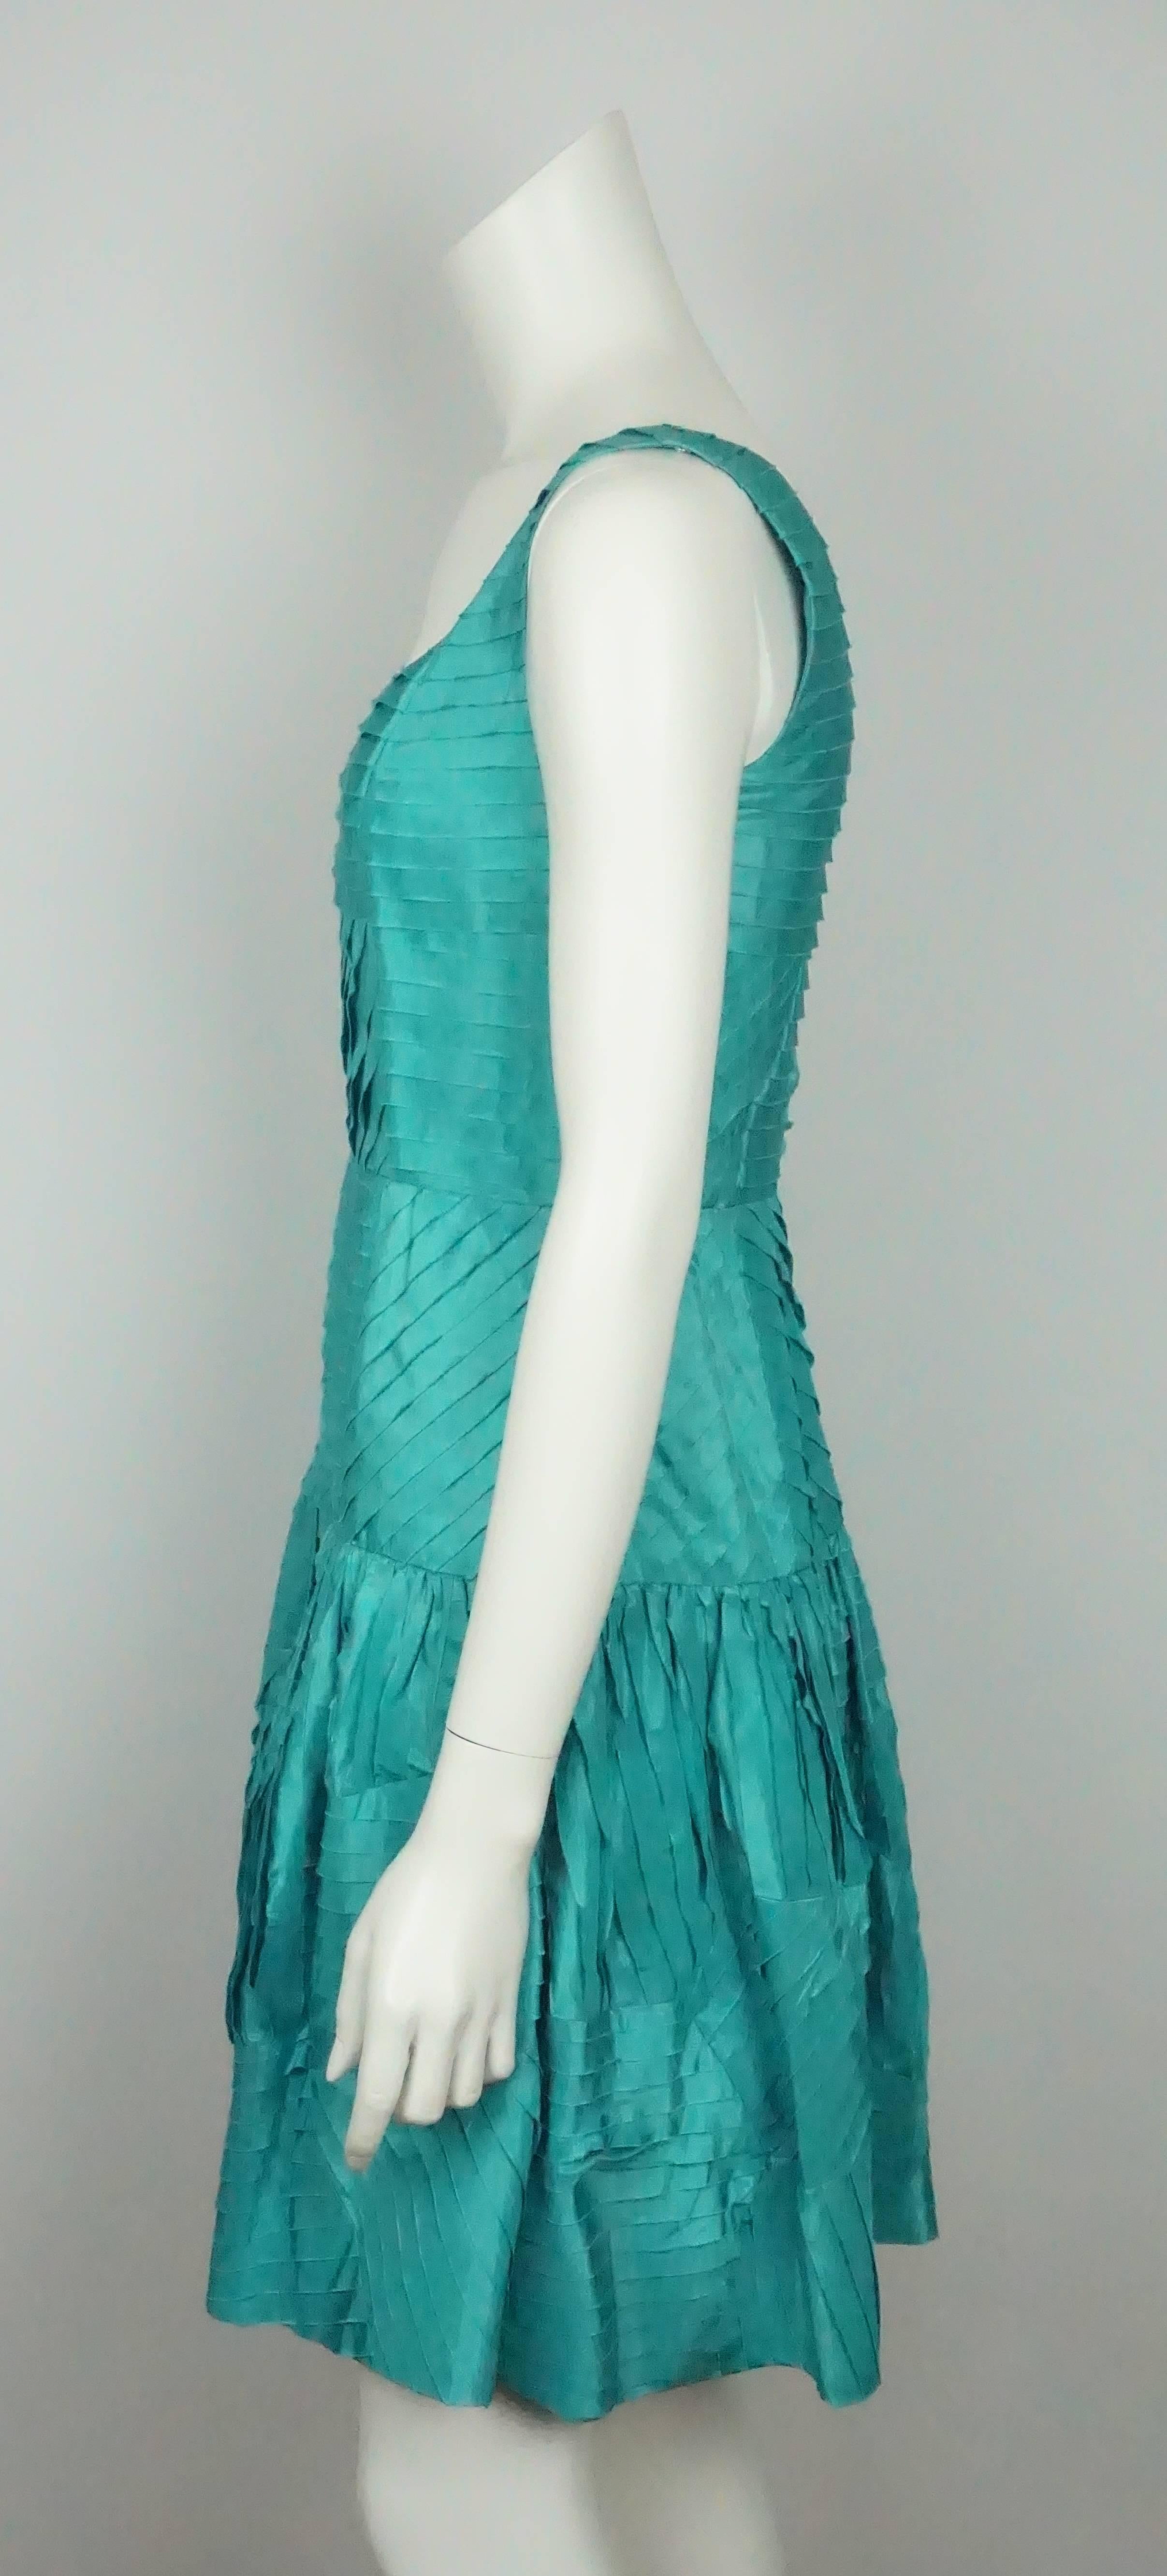 Oscar De La Renta Teal Silk Shutter Pleat Dress - 4  This classic and elegant Oscar creation is made of a beautiful Teal colored raw silk . The dress is sleeveless with a square neckline and is fitted to below the waist. It is all shutter pleats and